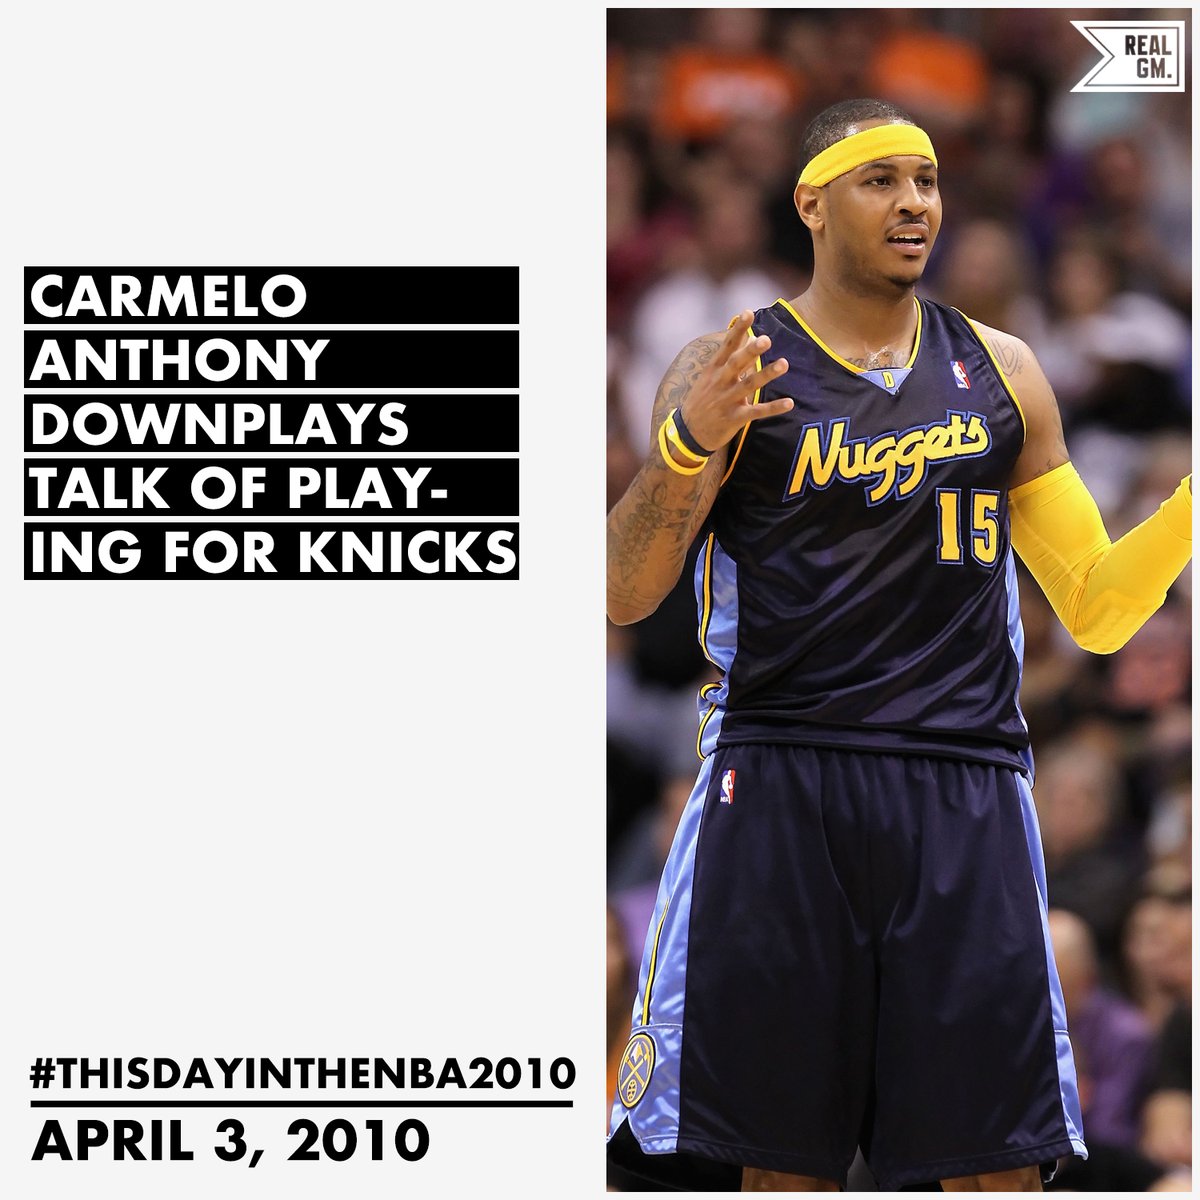  #ThisDayInTheNBA2010April 3, 2010Carmelo Anthony Downplays Talk Of Playing For Knicks https://basketball.realgm.com/wiretap/203064/Carmelo-Downplays-Talk-Of-Playing-For-Knicks